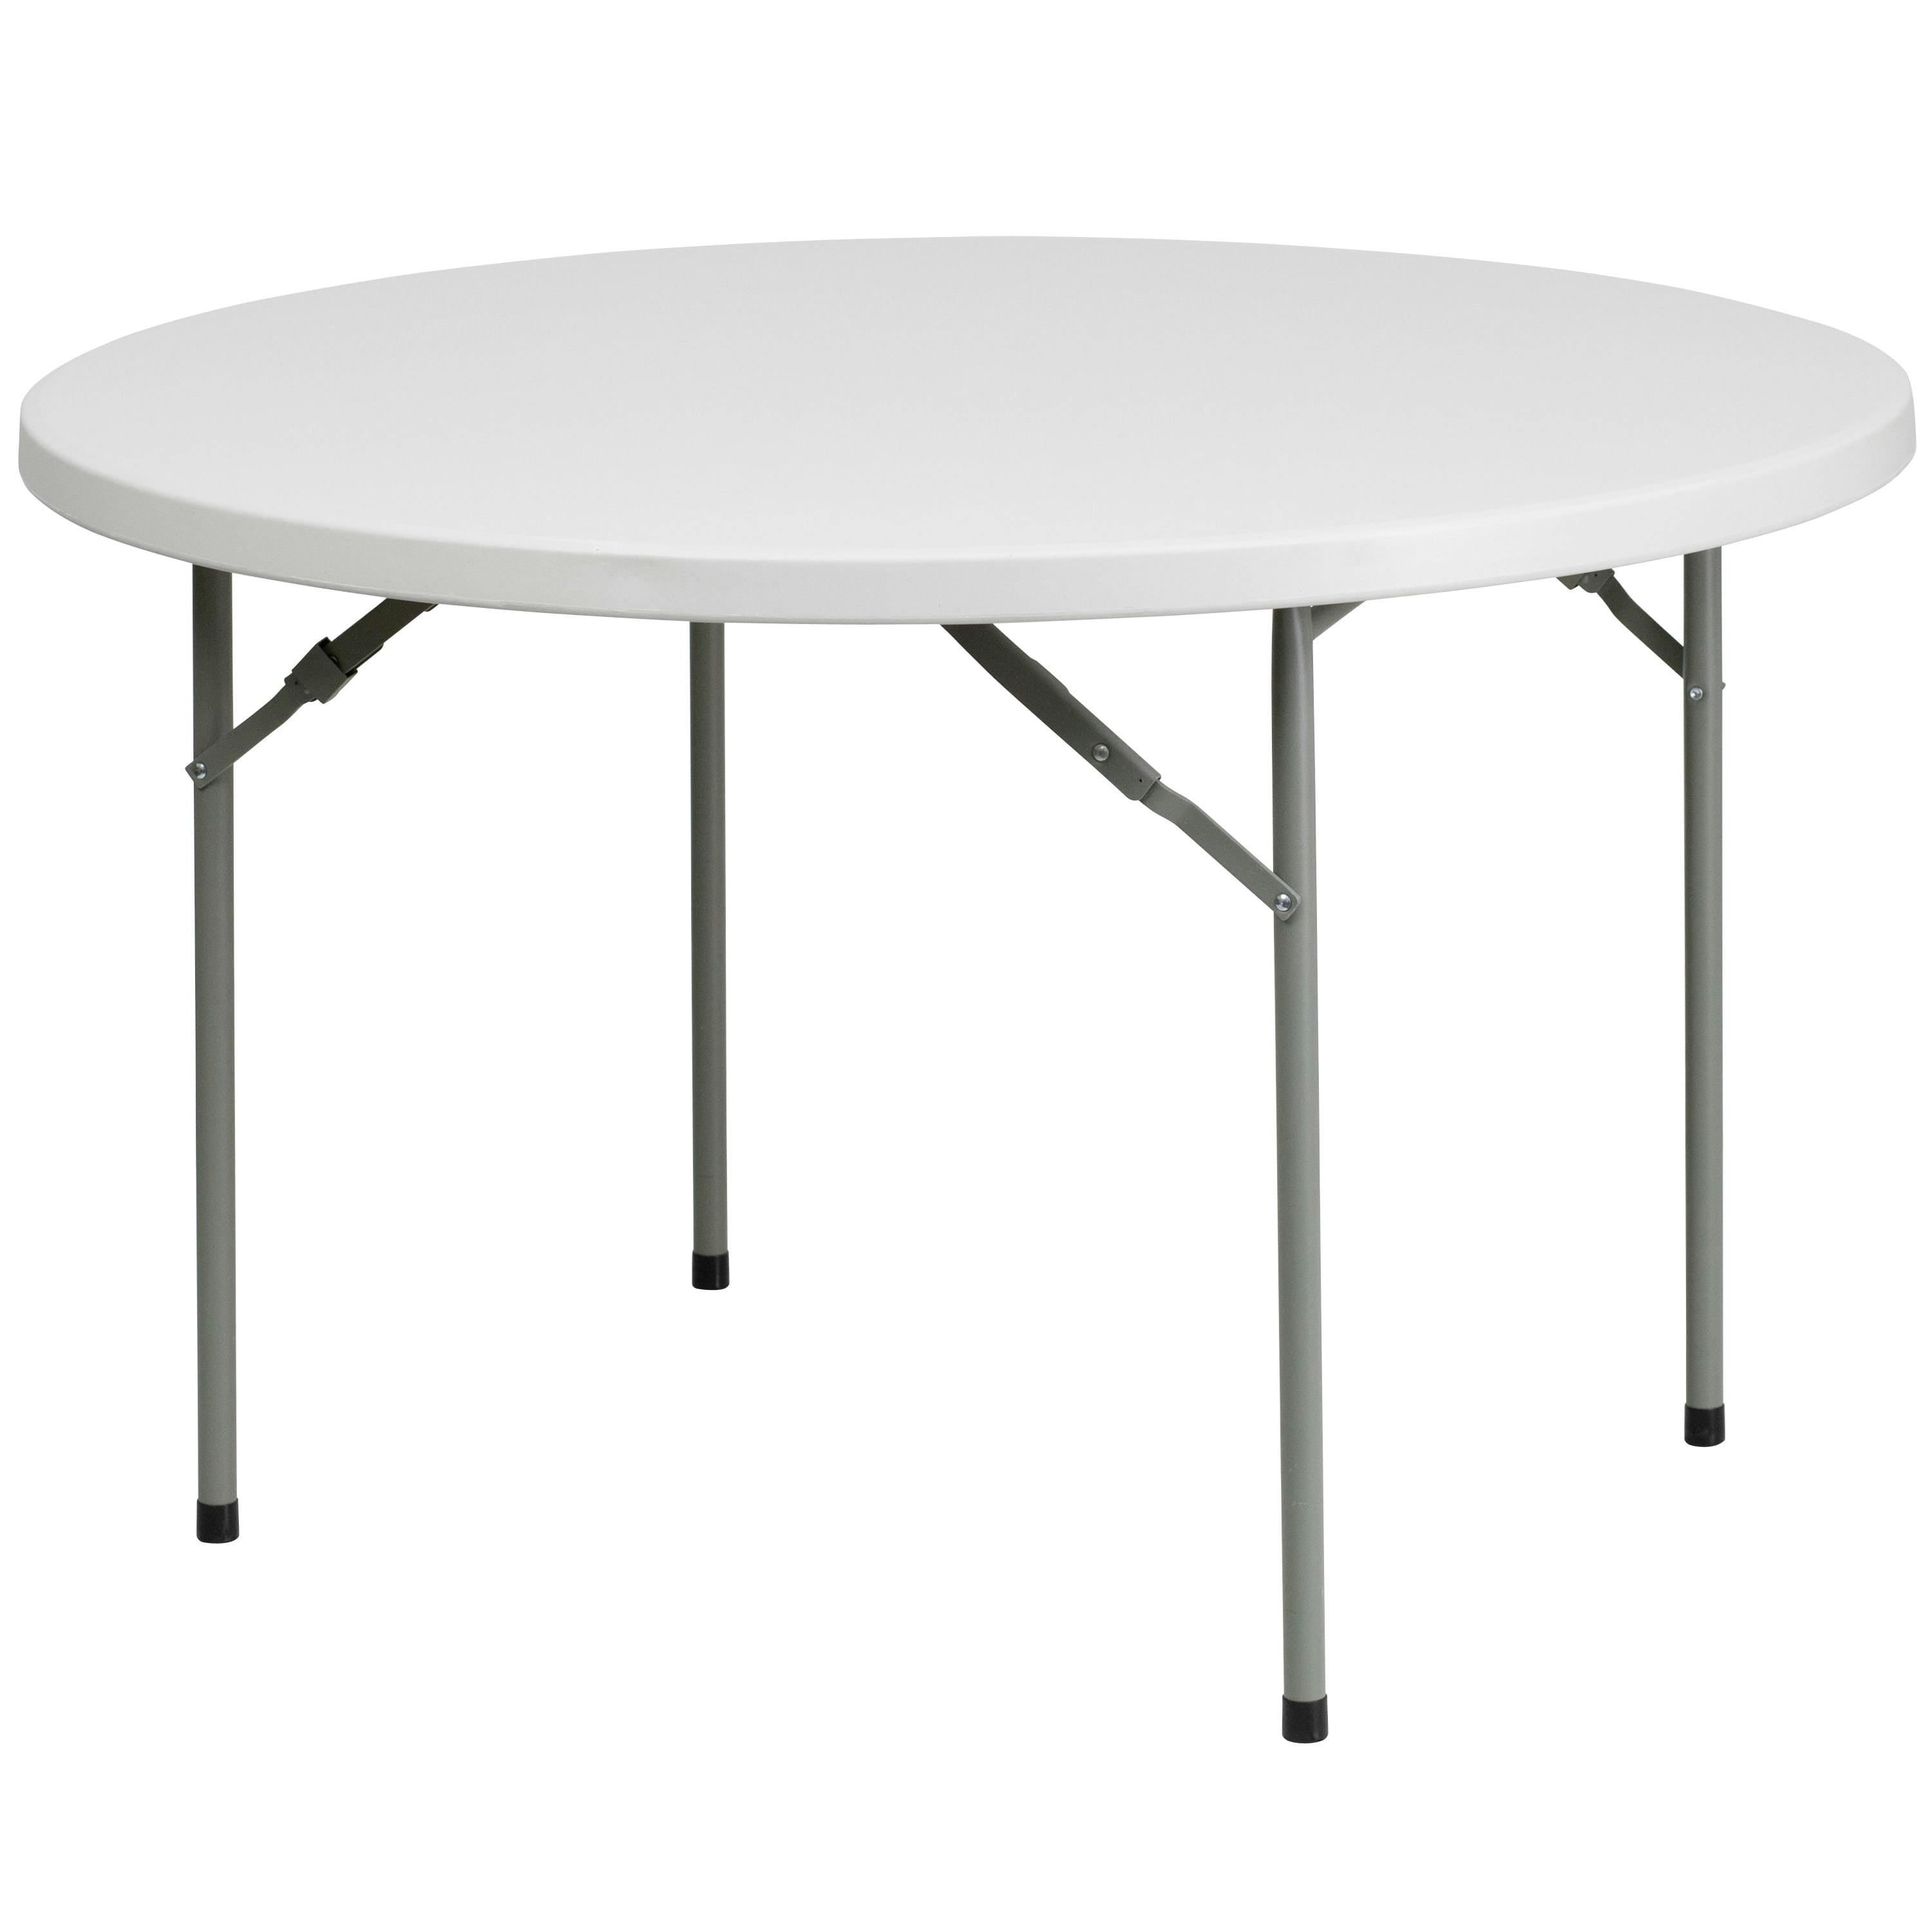 Granite White 48" Round Patio Table with Metal Frame